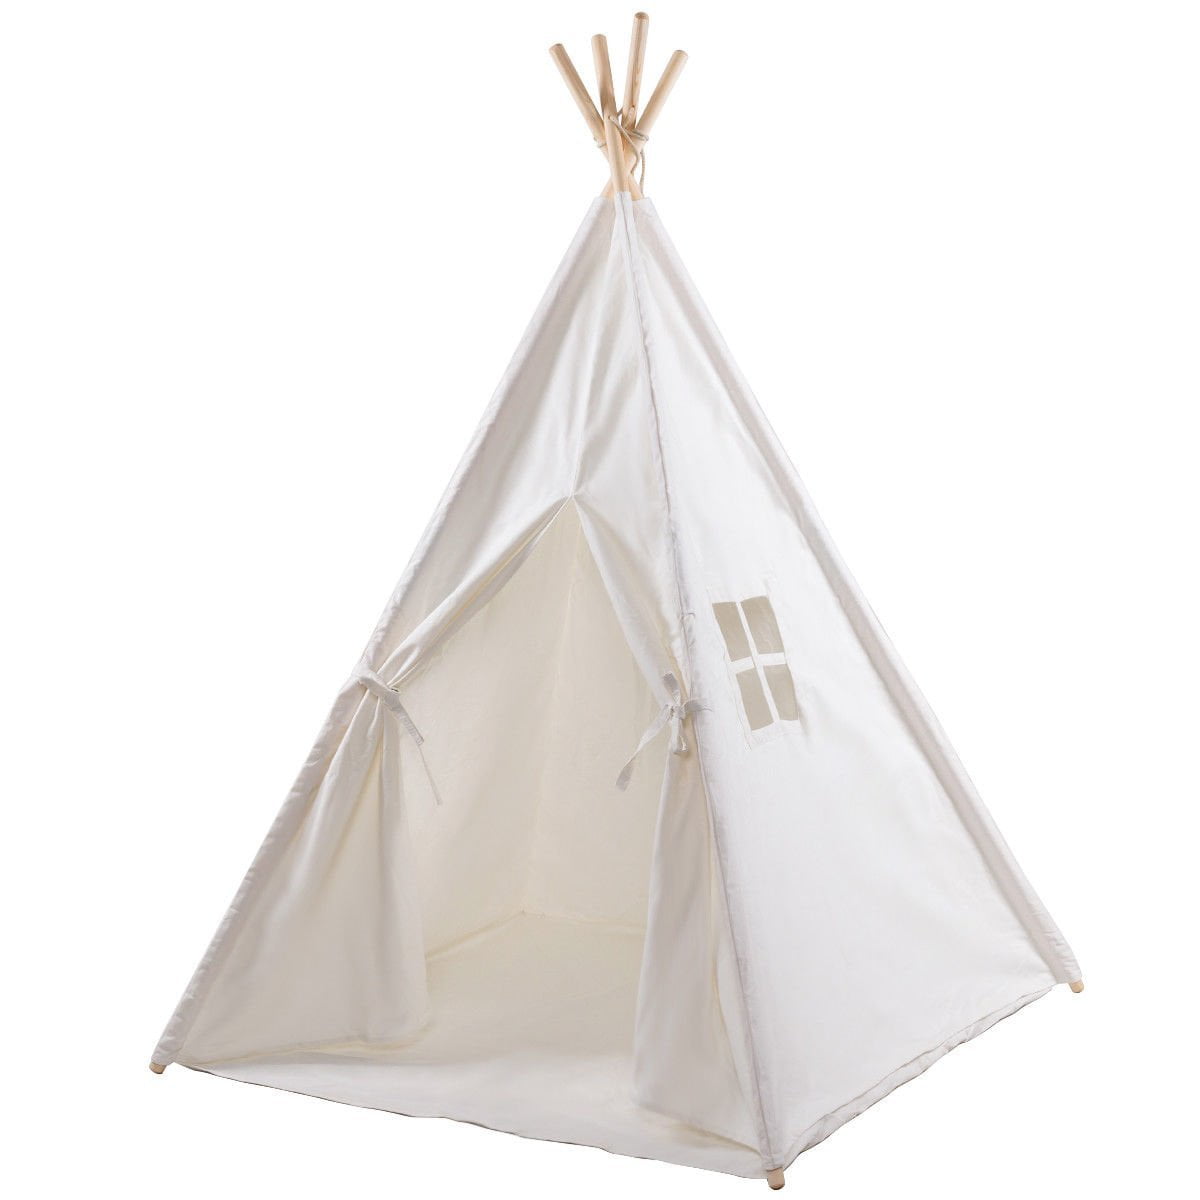 Kids Indoor Outdoor White Indian Tent Teepee Play Play House Dome Portable Bag 